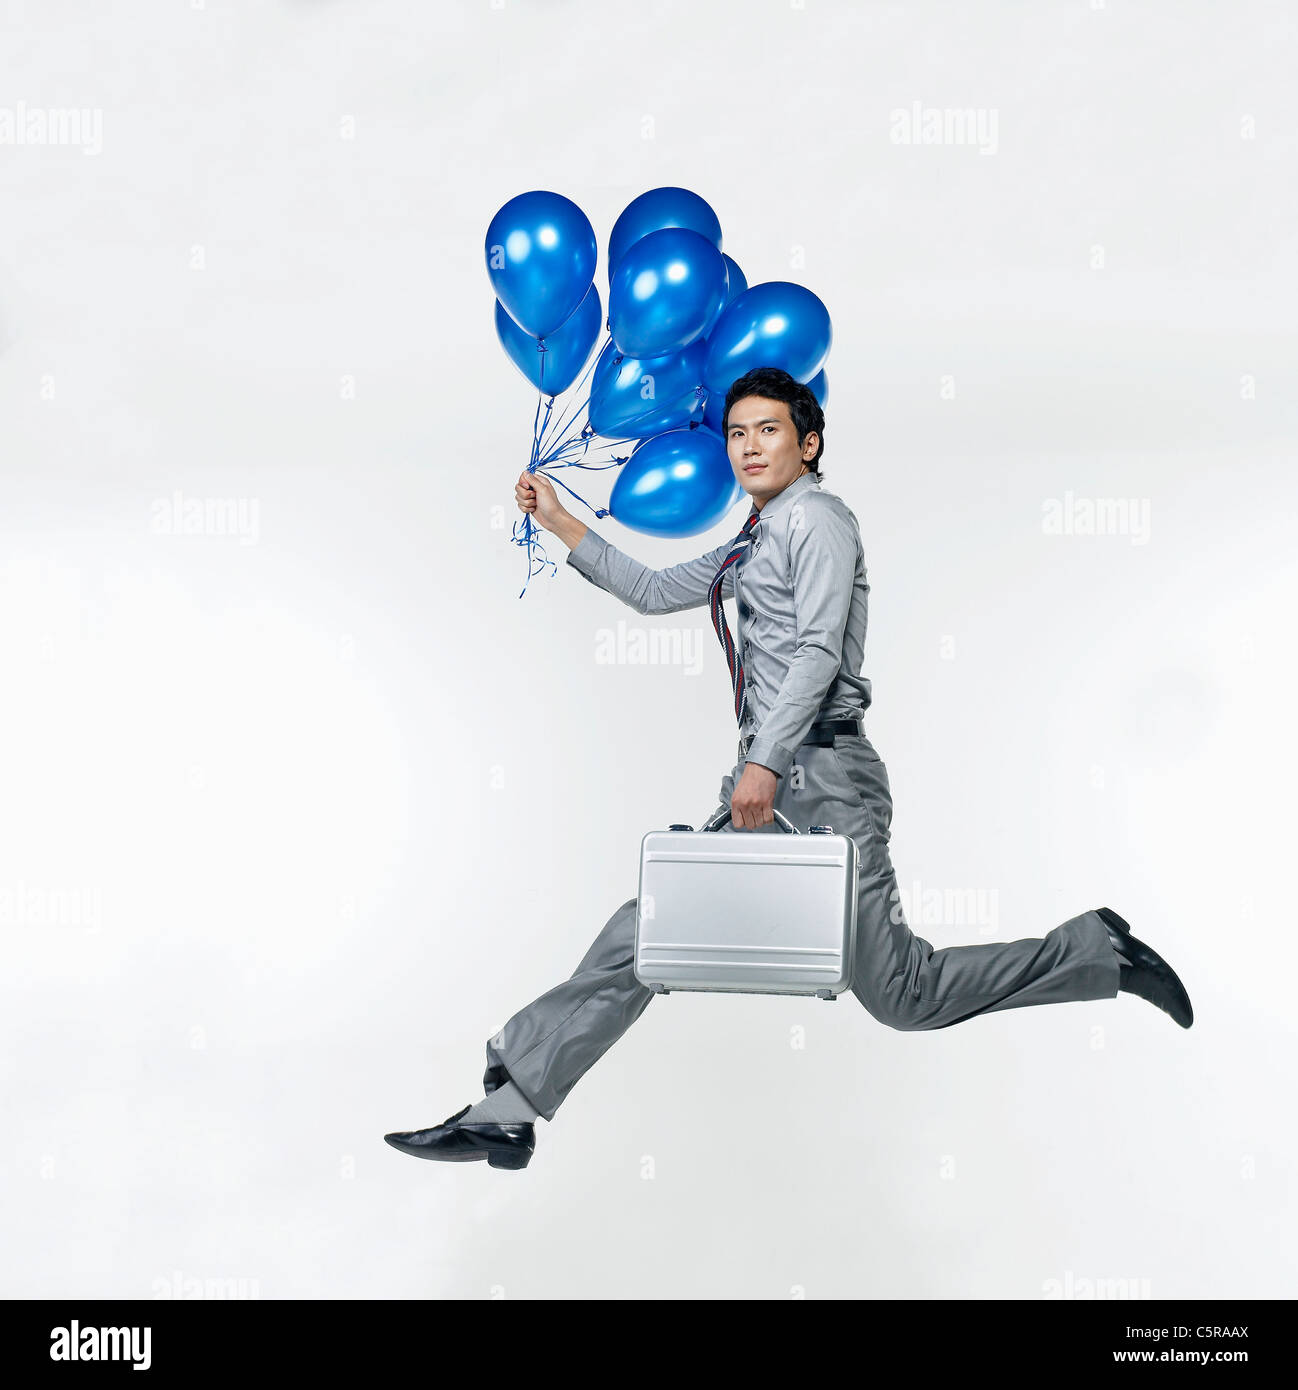 A man holding blue balloons and a briefcase Stock Photo